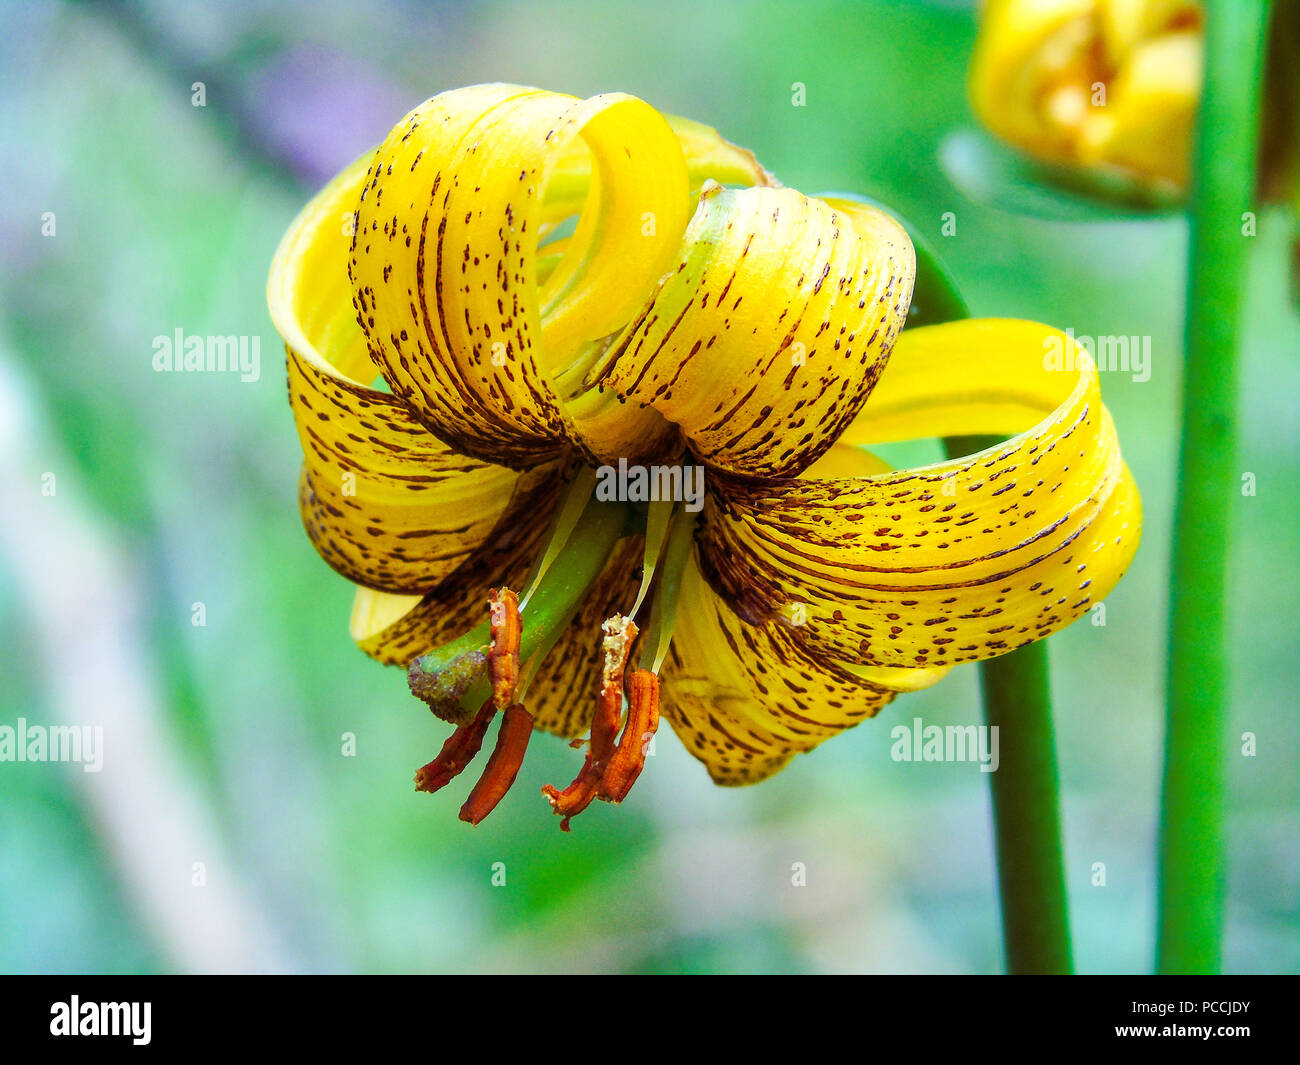 Lilium bosniacum is a lily native to Bosnia and Herzegovina. It's also known as golden lily and Bosnian lily. Stock Photo